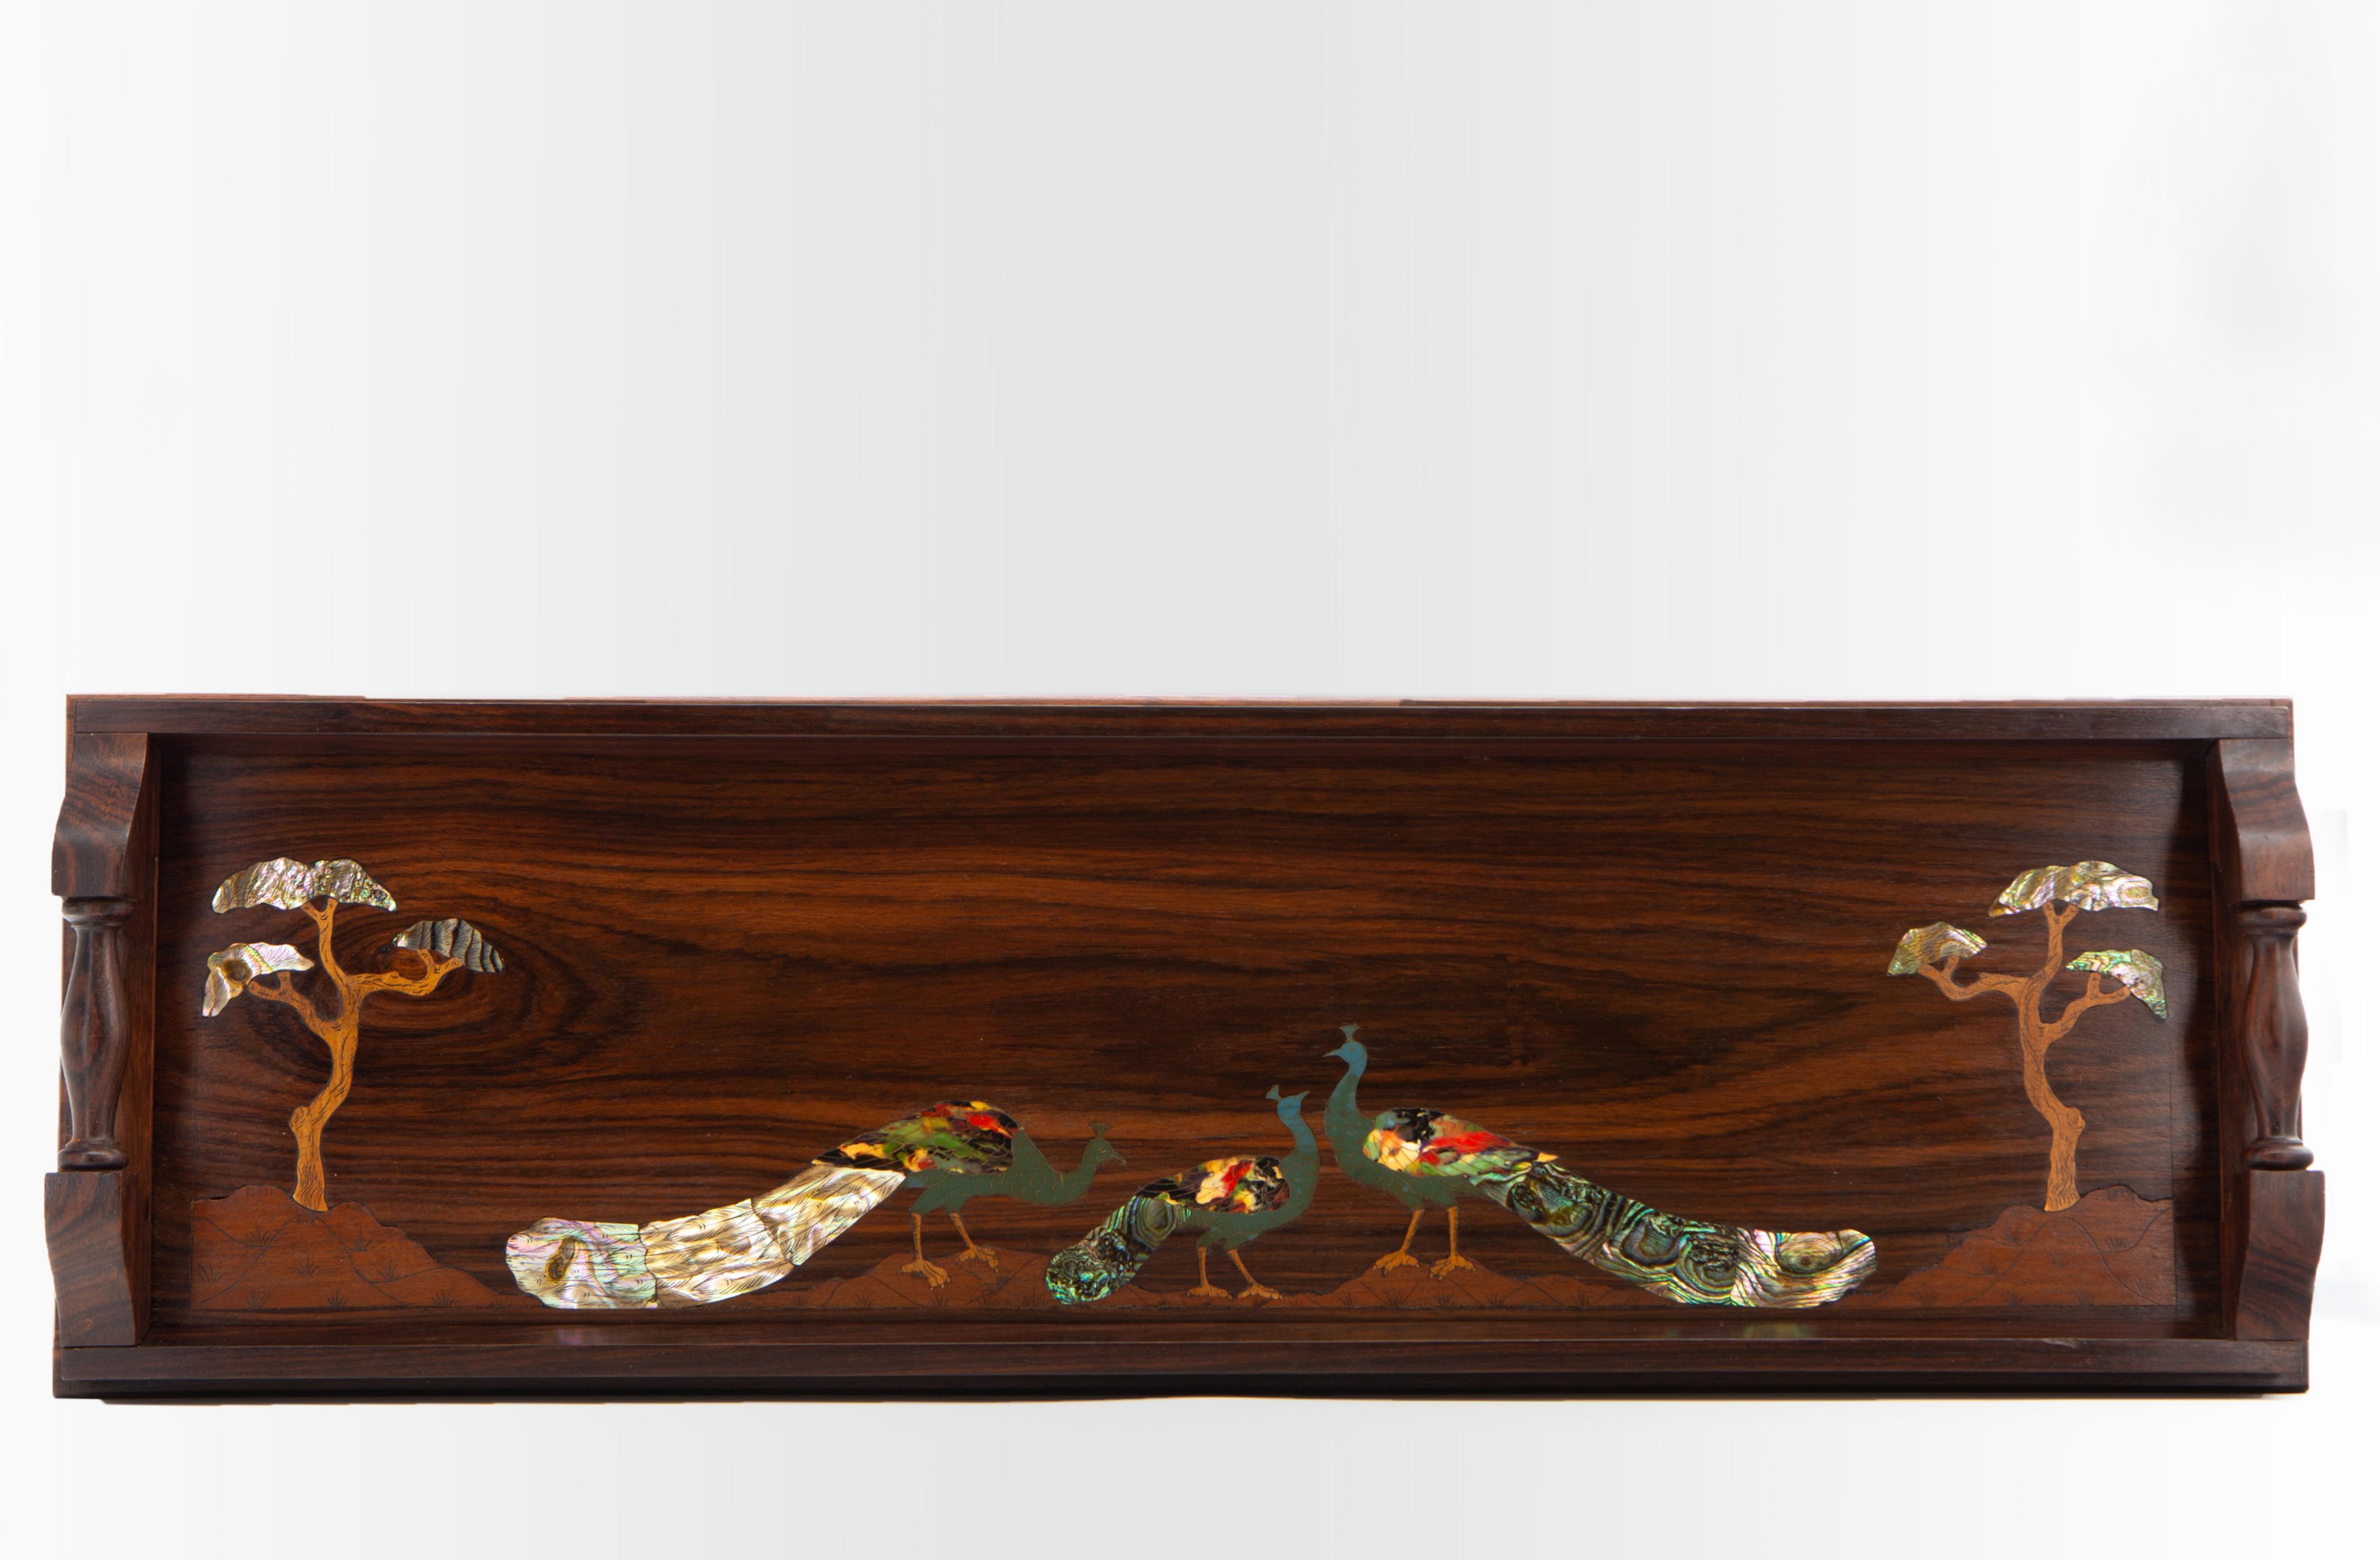 Beautiful, long antique rosewood narrow handled serving tray, inlaid in wood and mother of pearl, depicting  peacocks with trees either side. Circa 1920.  

The tray shows superb figuring in the solid rosewood grain, with the inlays jumping out, a